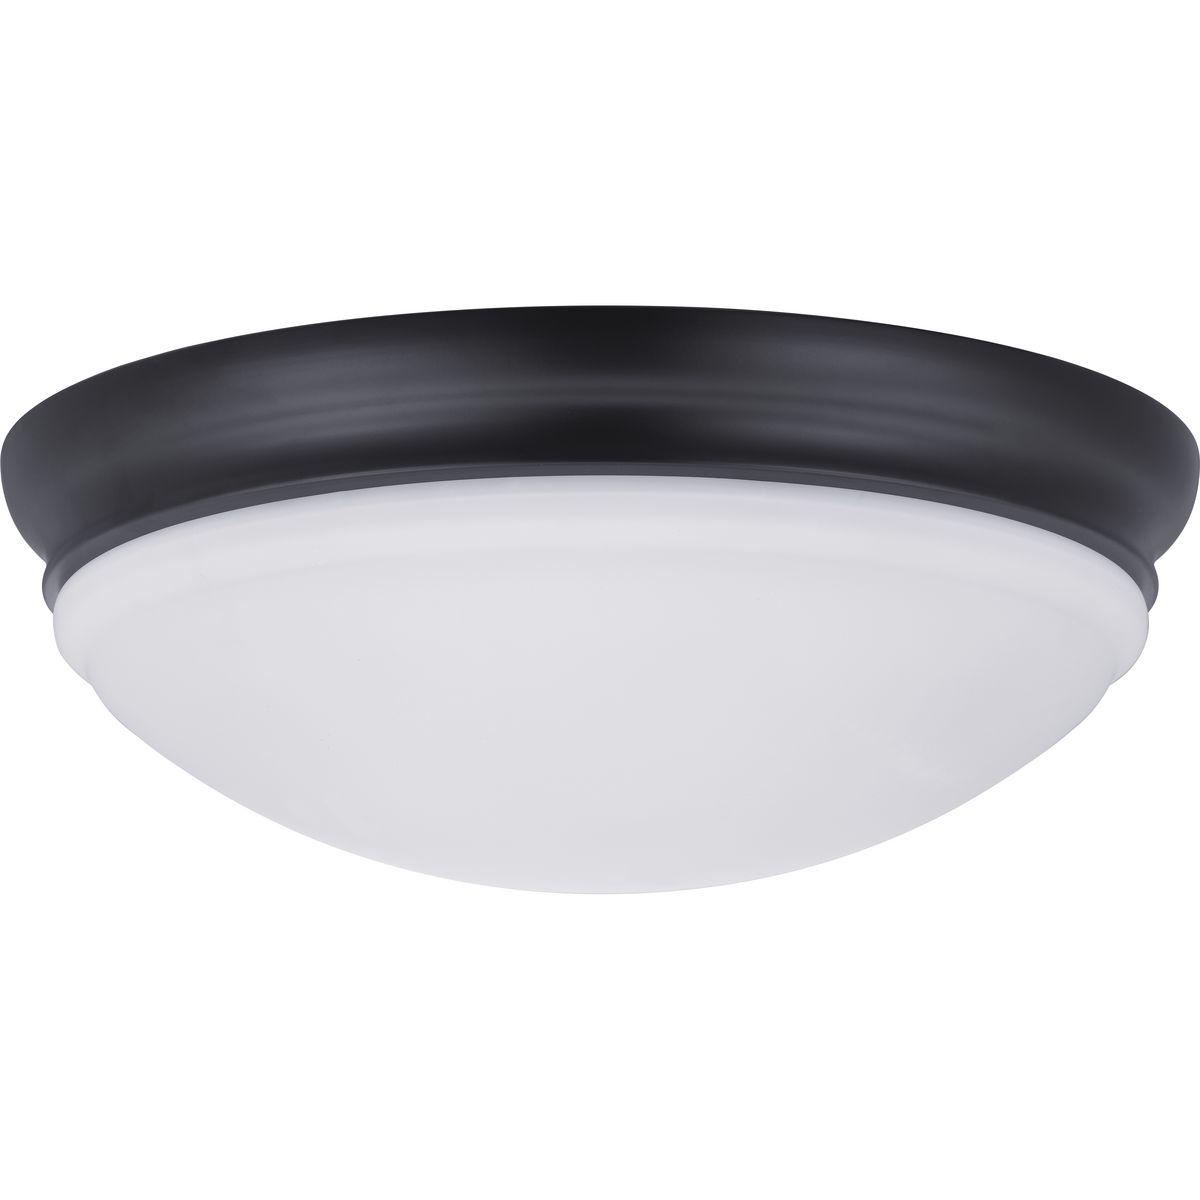 Hubbell P350131-020-30 LED 15in. flush mount with white acrylic diffuser mounts to an Antique Bronze ceiling pan. Ideal for ceiling or wall mount applications and suitable to add ambient illumination for Modern or Traditional interior spaces.  ; The classic ceiling fixture: A p